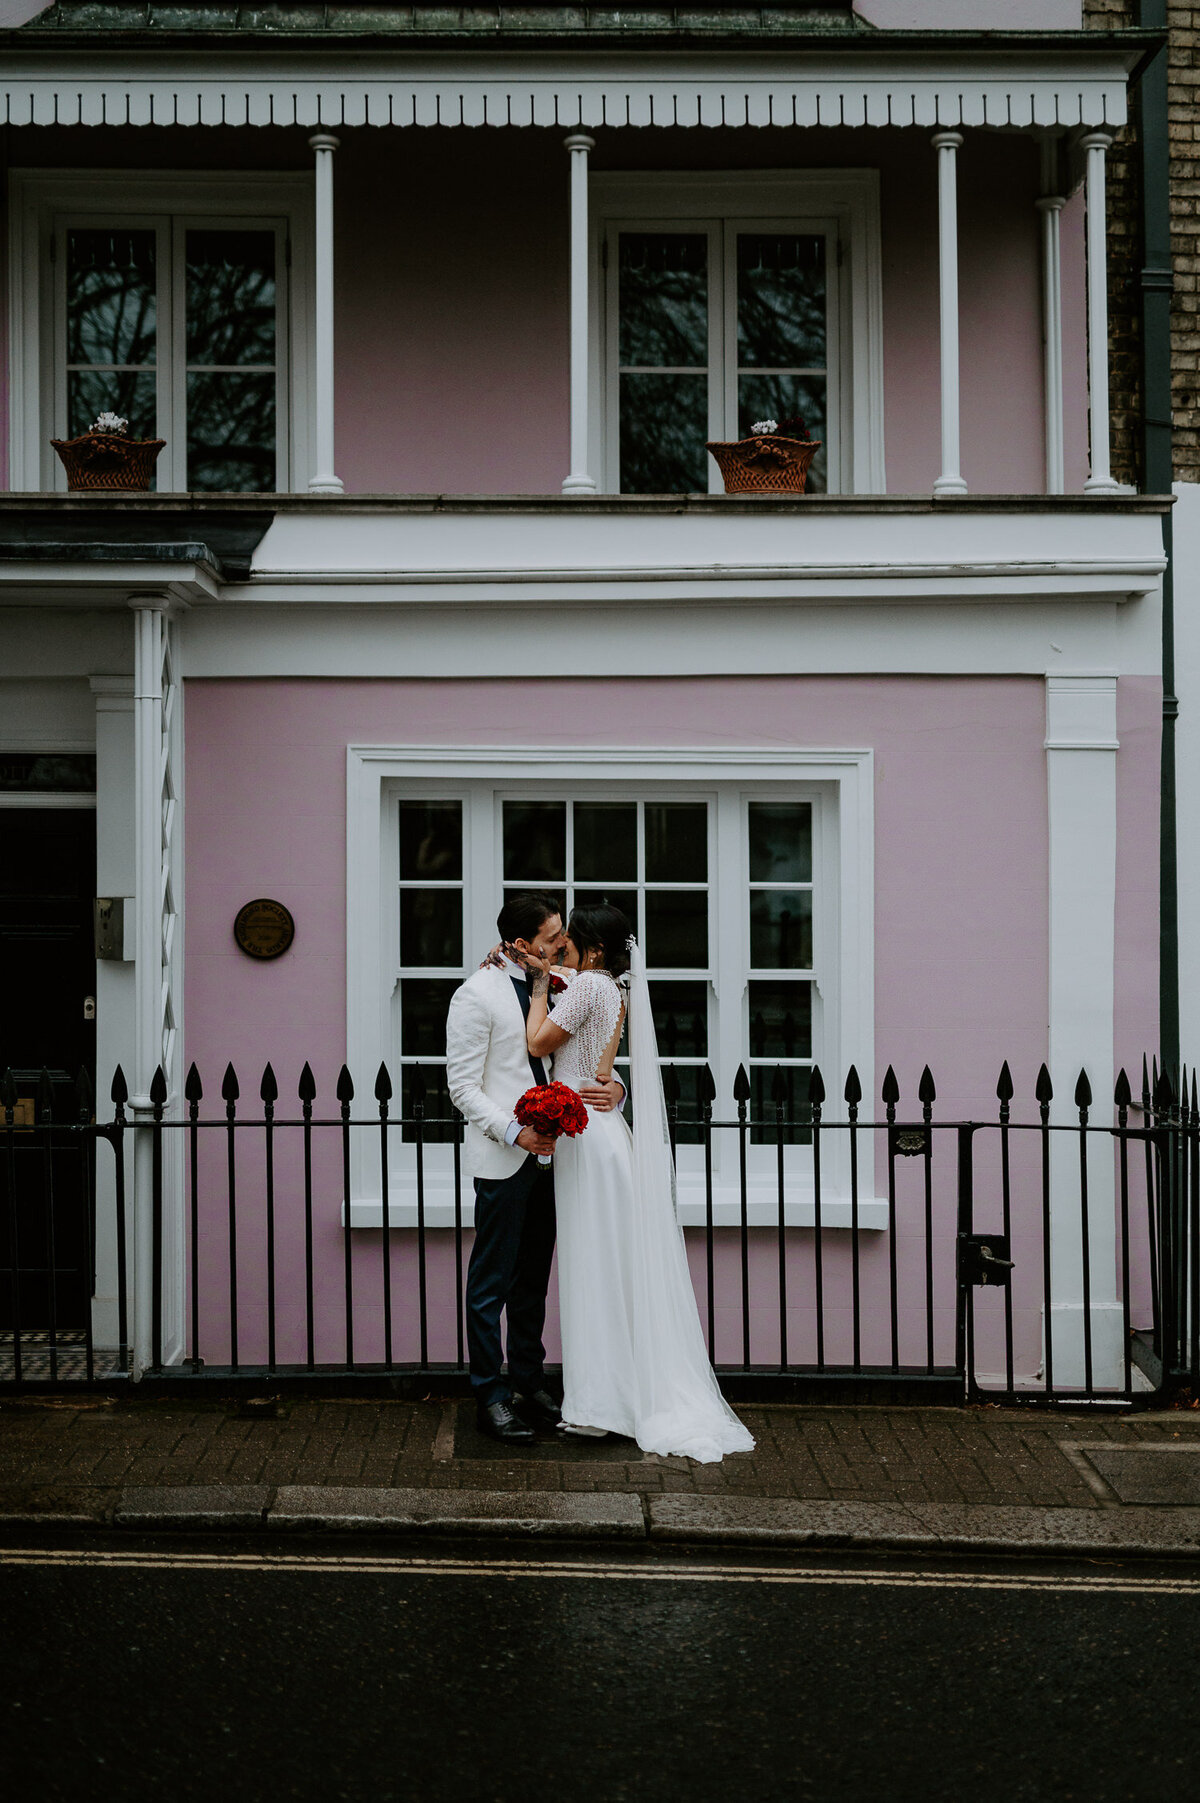 A couple kiss in front of a pink building in London on their wedding day. The groom is wearing a white tux jacket and the bride has a vintage style dress and henna on her hands.